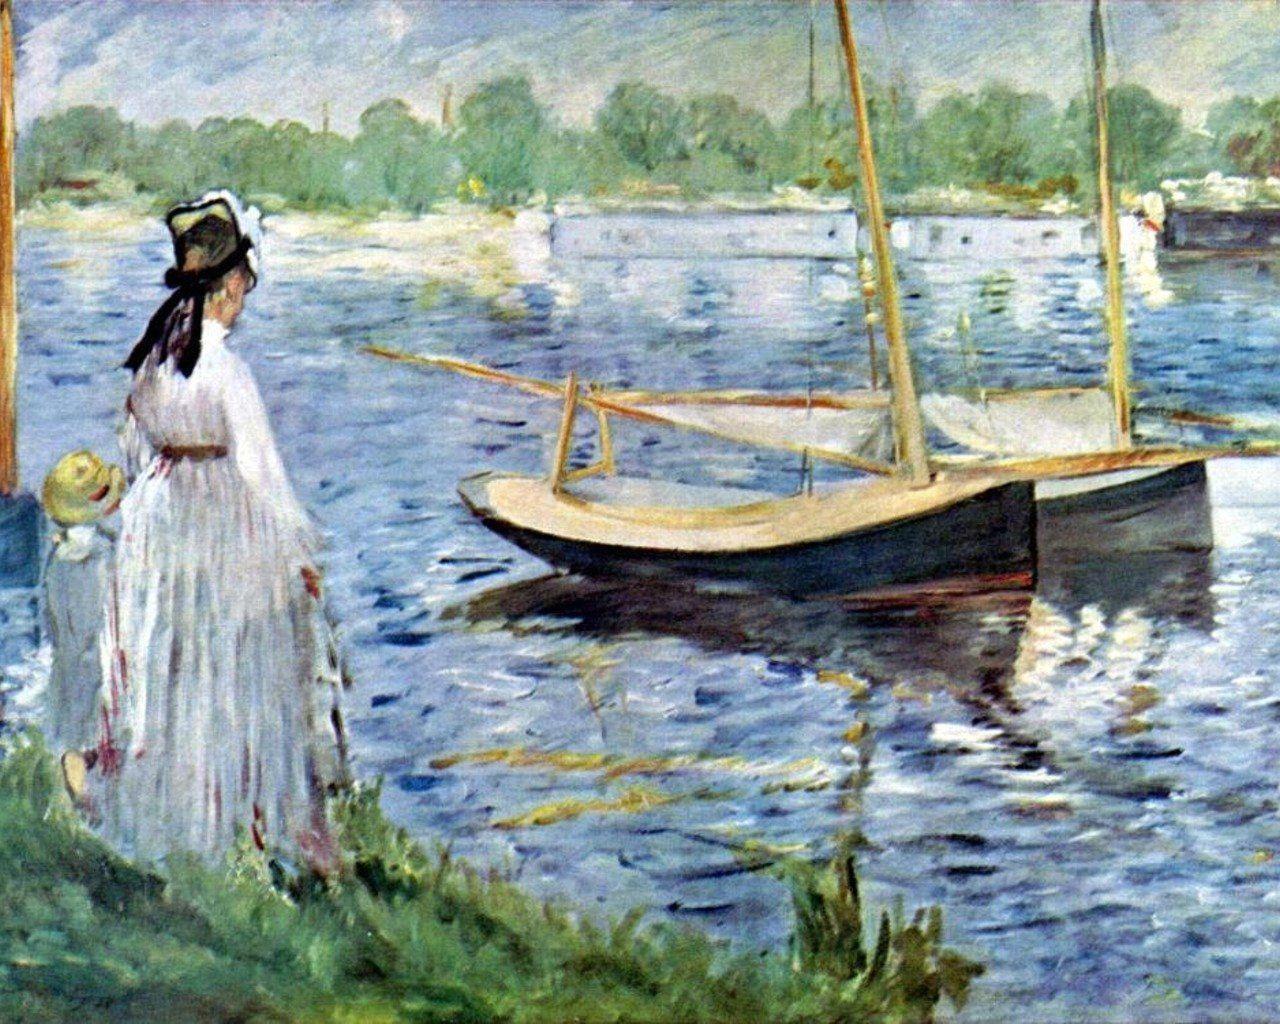 Image of a Manet painting of a woman and child on the shoreline looking out on a lake at 2 boats. 